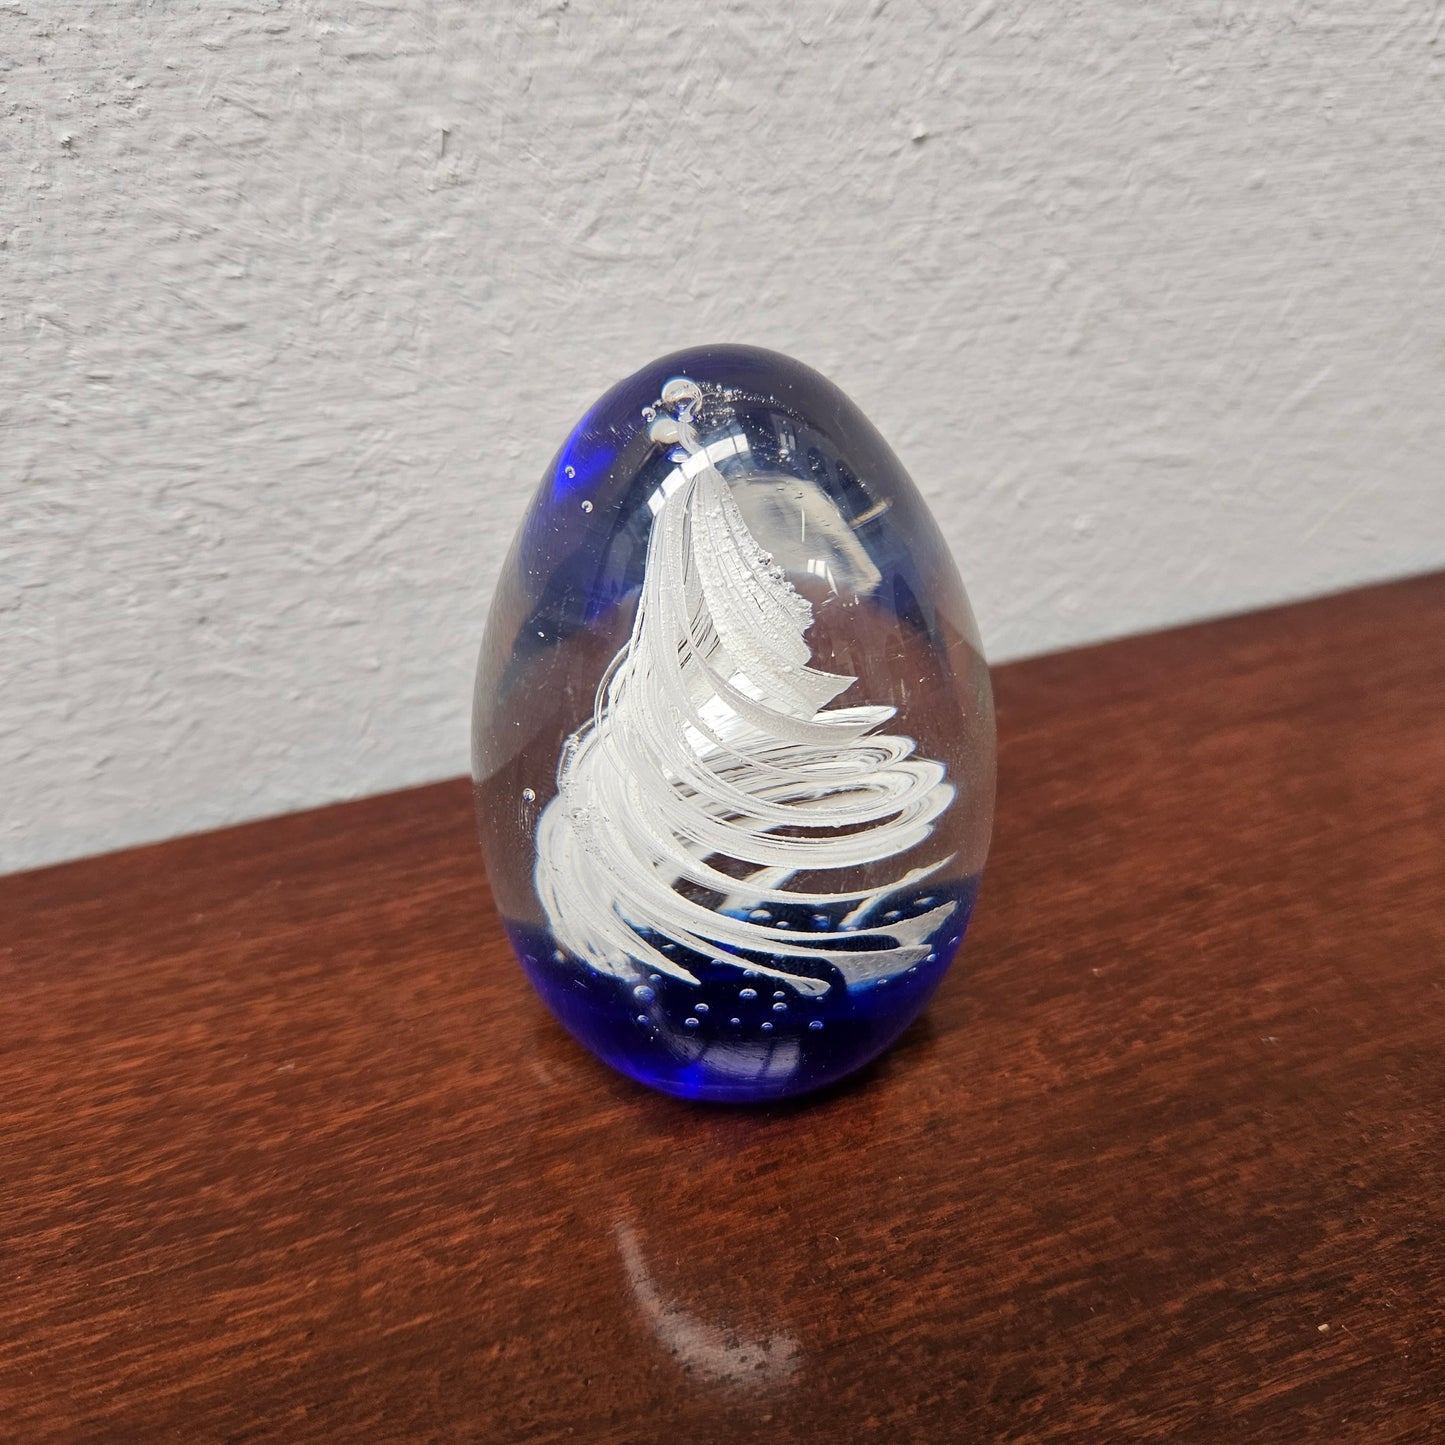 Attractive blue base, white swirl signed paperweight. In good condition. Please see photos as they form part of the description.